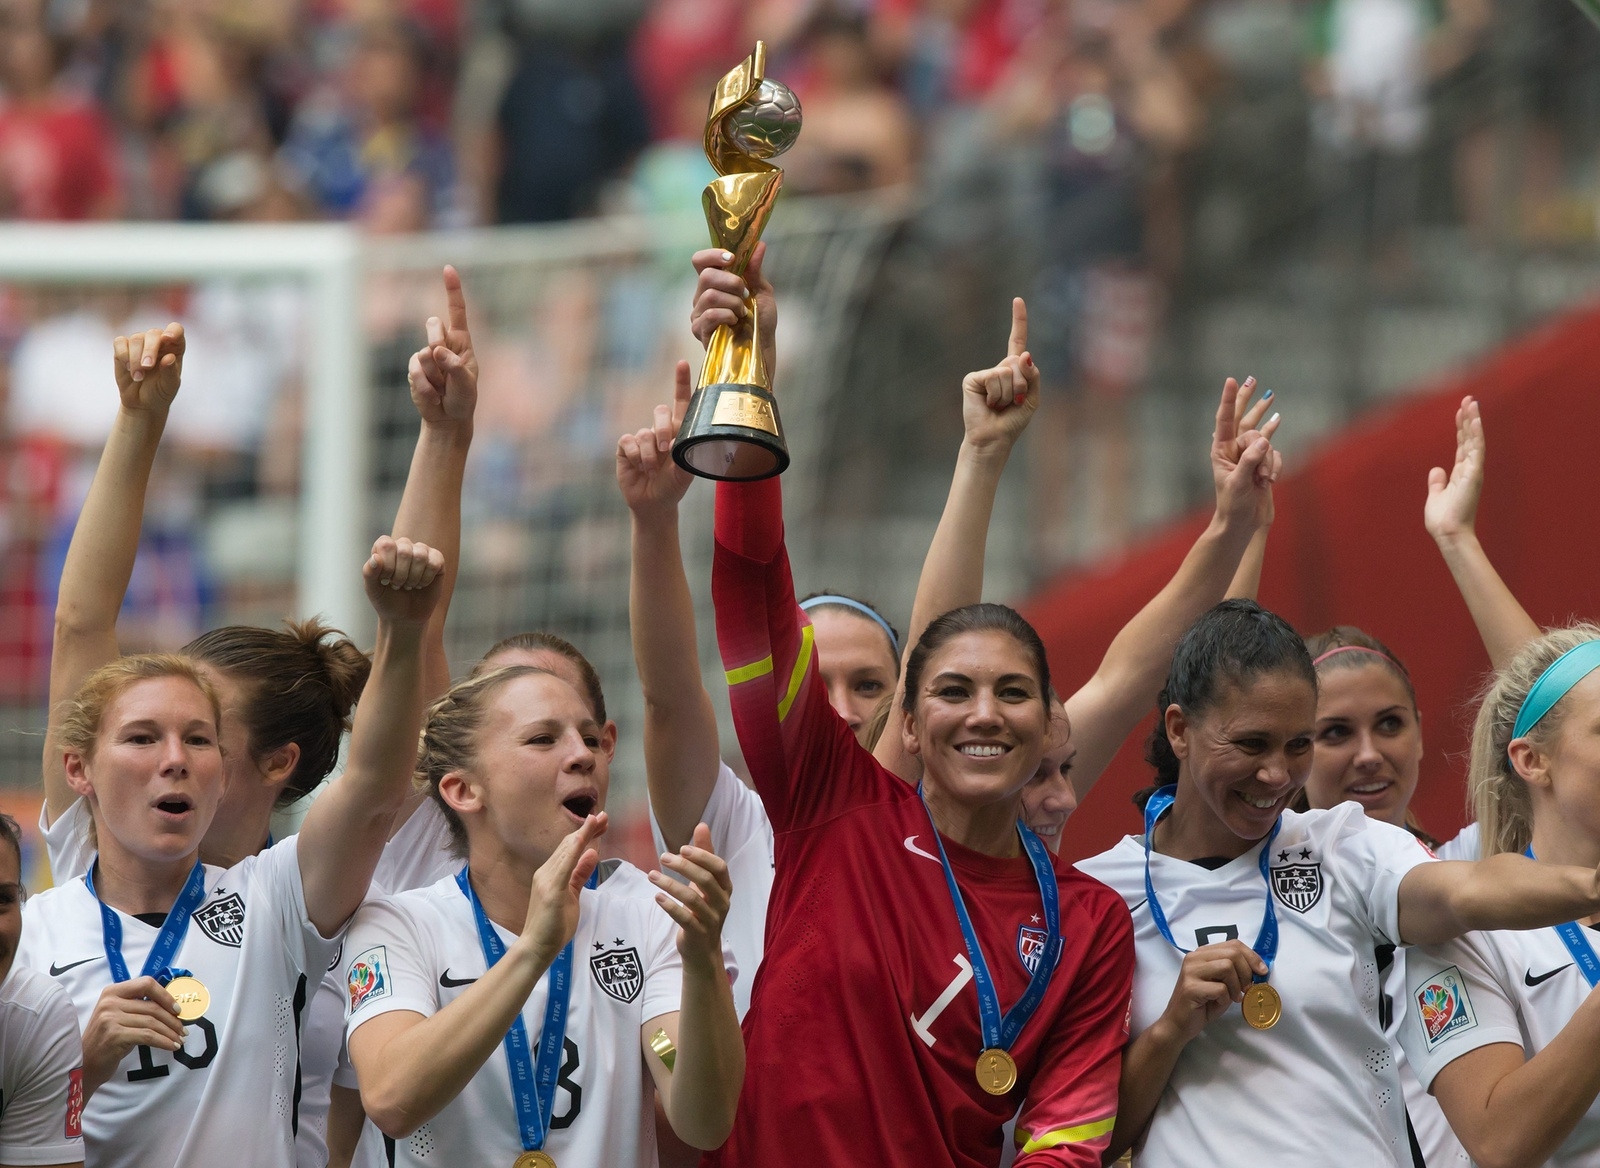 United States goalkeeper Hope Solo hoists the trophy as she and her teammates celebrate defeating Japan to win the FIFA Women's World Cup soccer championship in Vancouver, British Columbia, Canada, Sunday, July 5, 2015.   (Darryl Dyck/The Canadian Press via AP) MANDATORY CREDIT